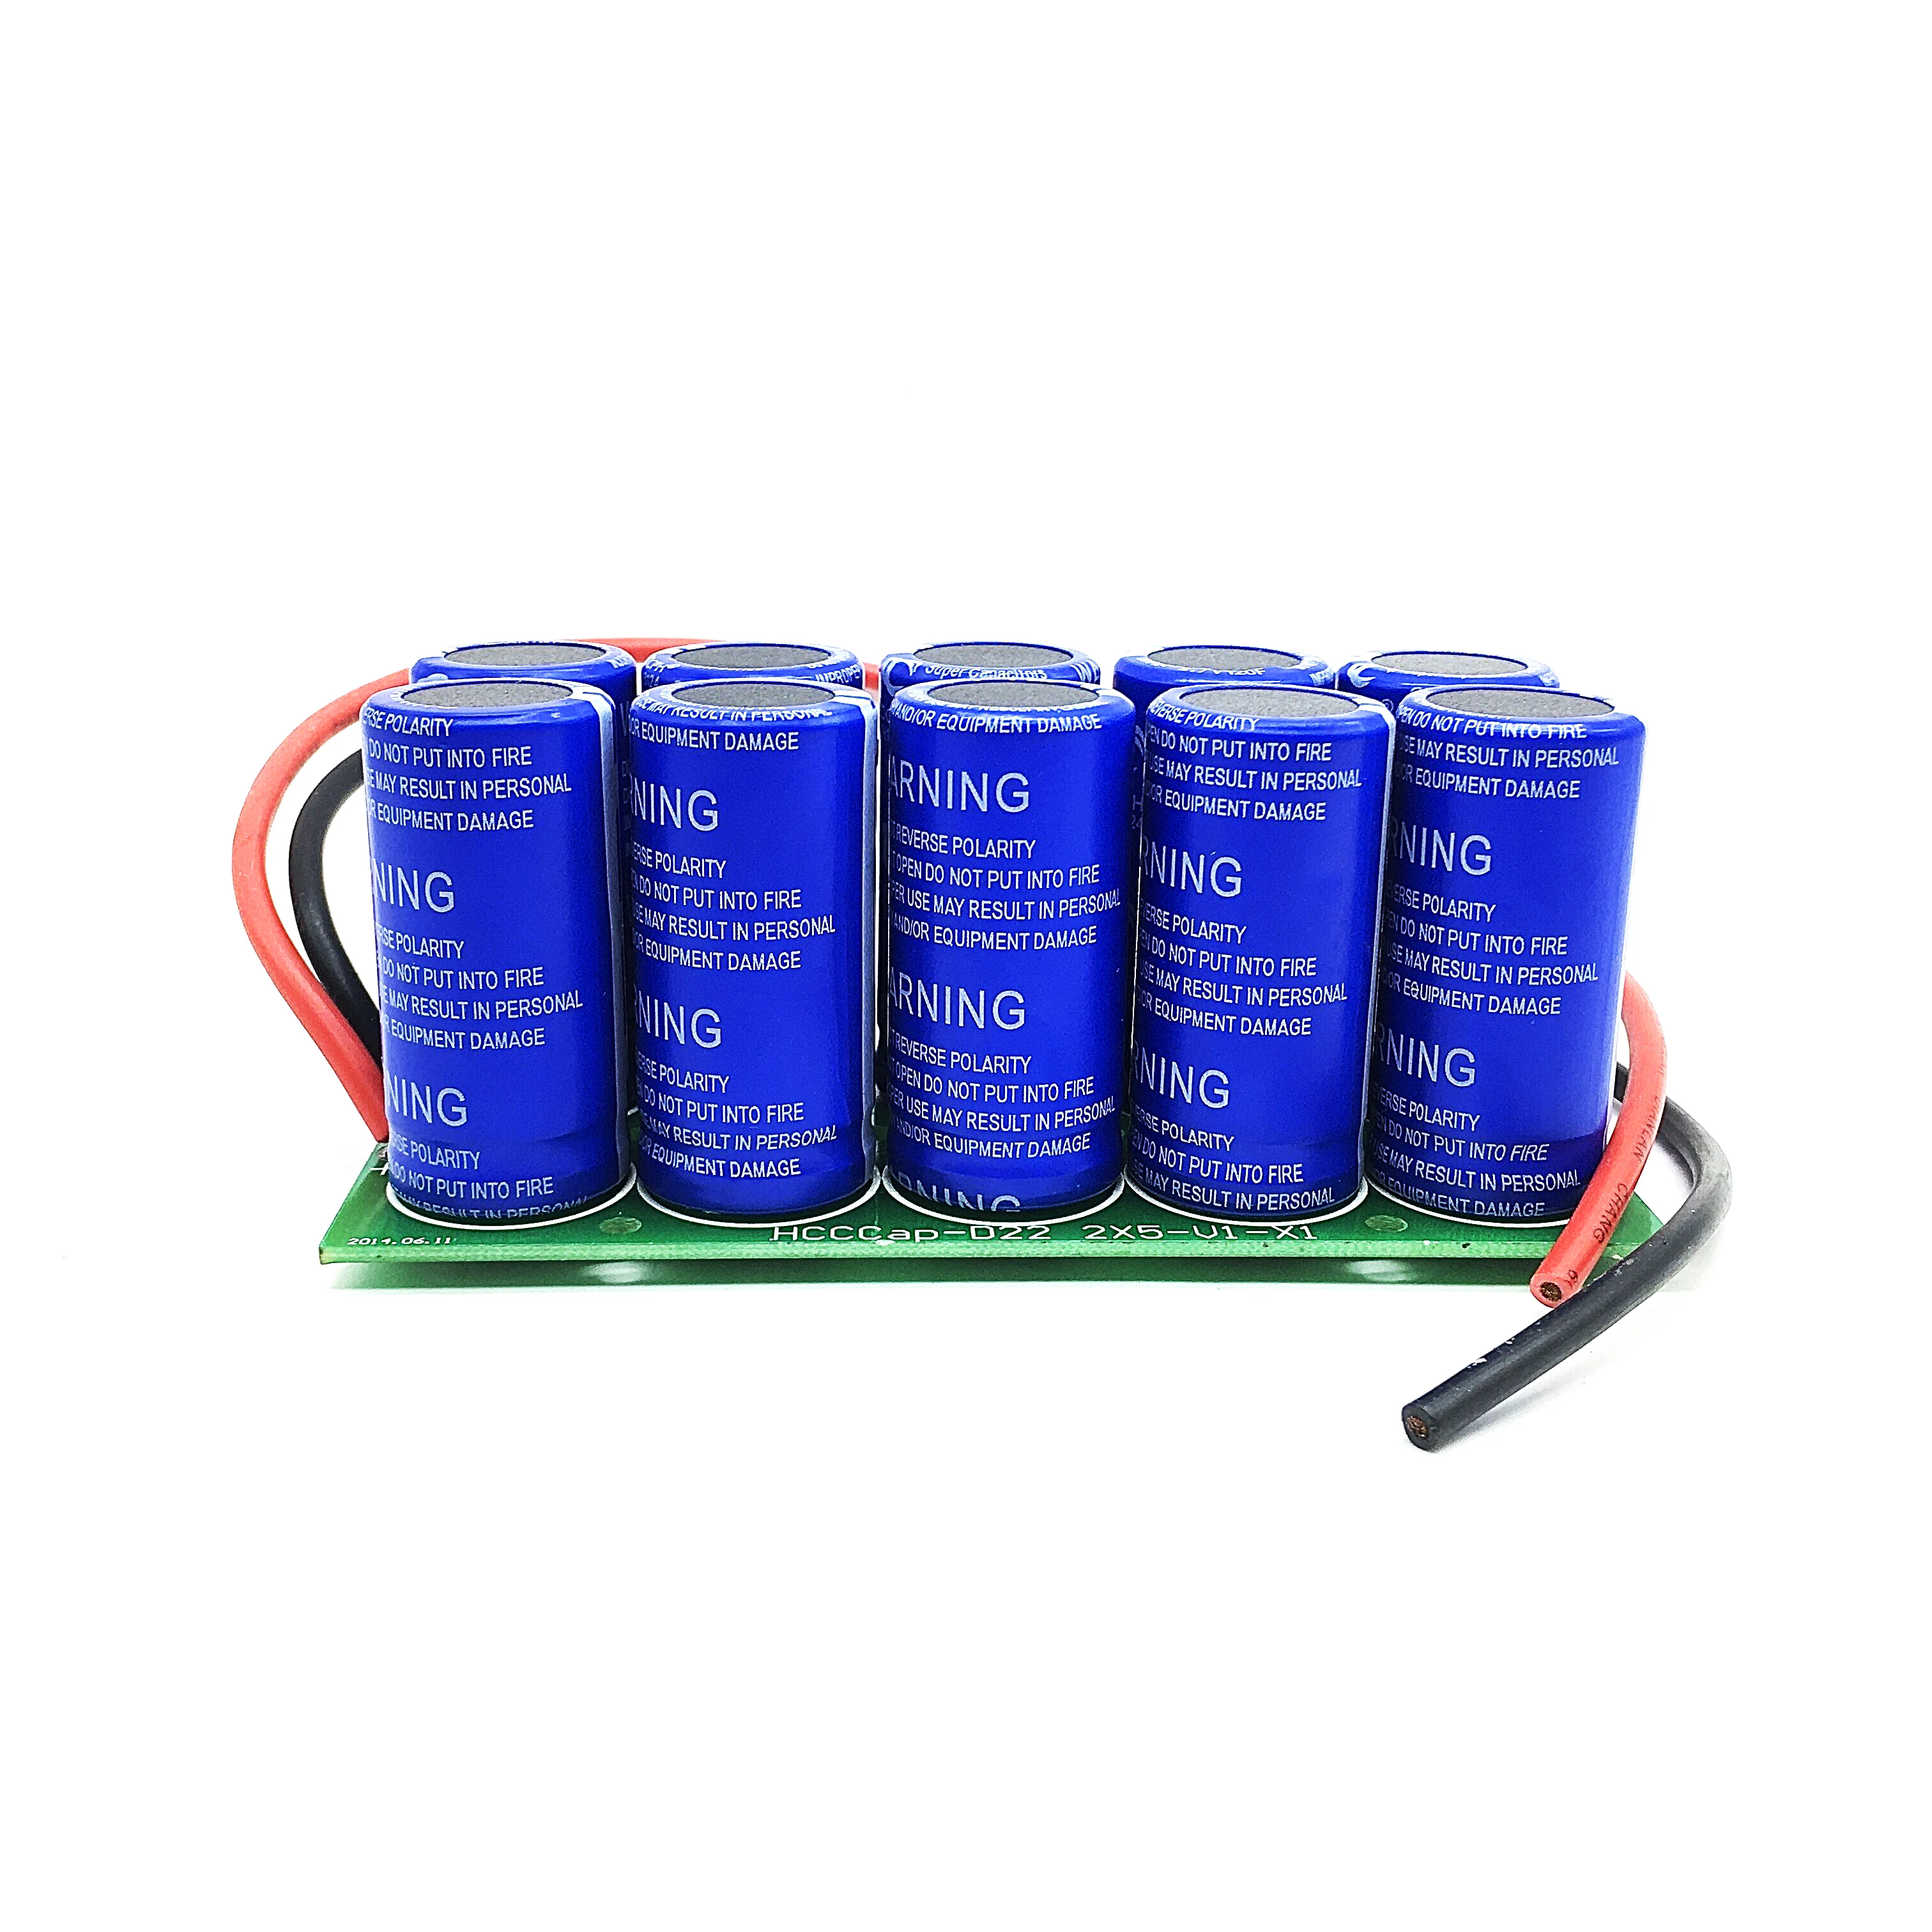 Super Capacitors Farad Capacitor Modules 27V 12F SuperCapacitors With Double Protection Board With Line UltraCapacitor china manufacturer gigabit 4 sfp pon ports olt ftth olt epon with 4 sfp pon modules